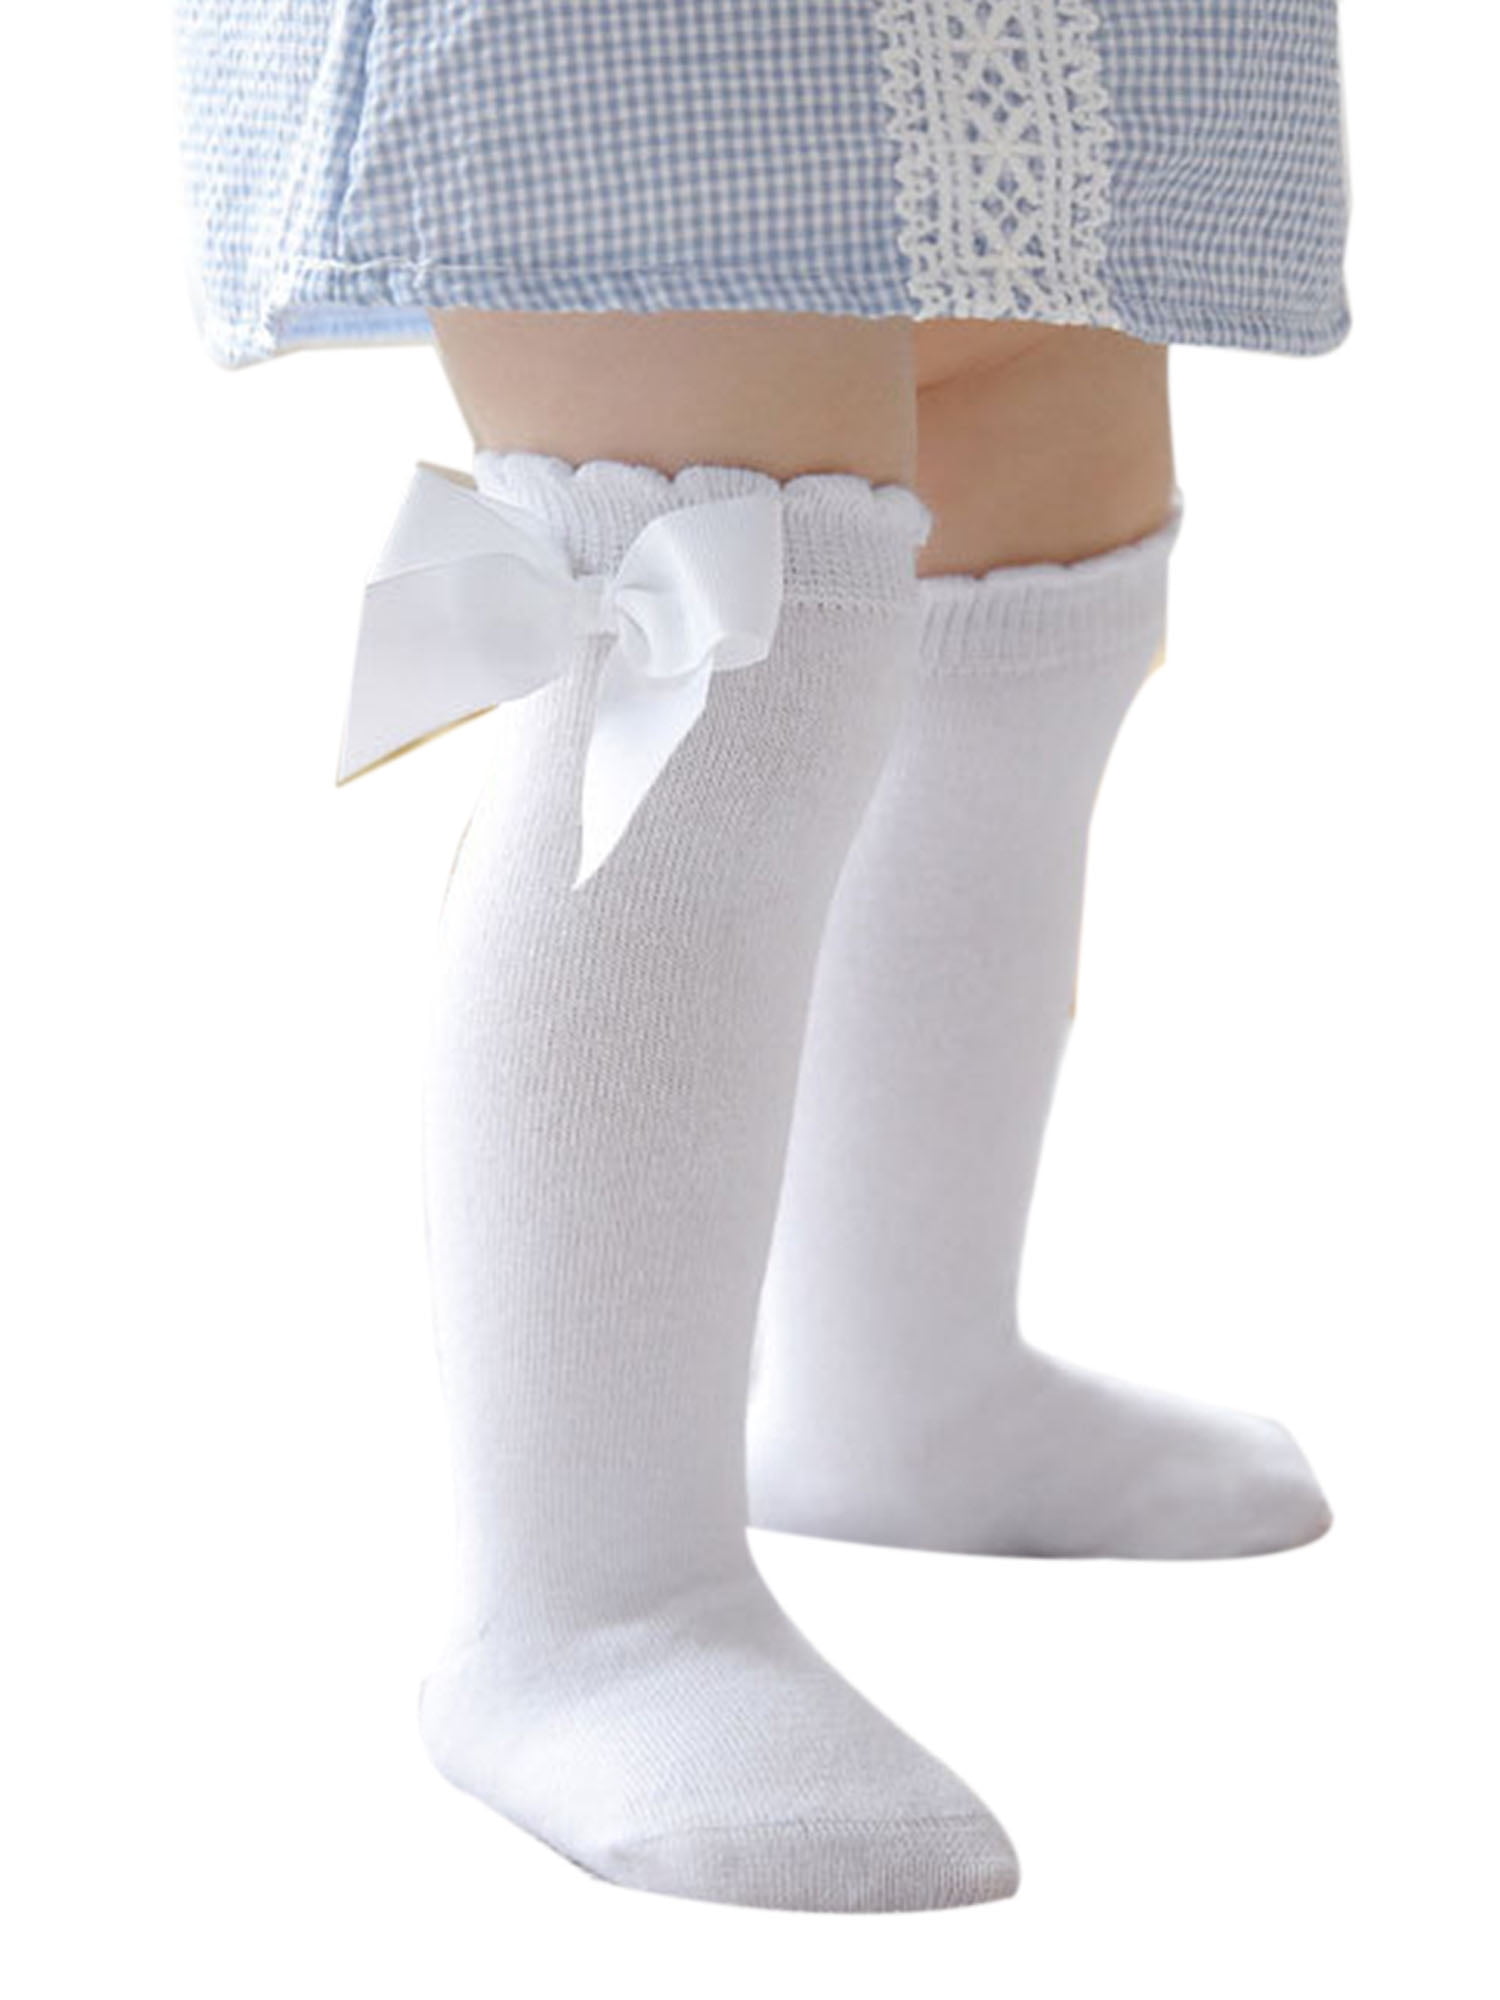 Frilly Gingham Topped Ankle Socks *3pairs* Boy/Girl colours WILL MIX IF REQUIRED 